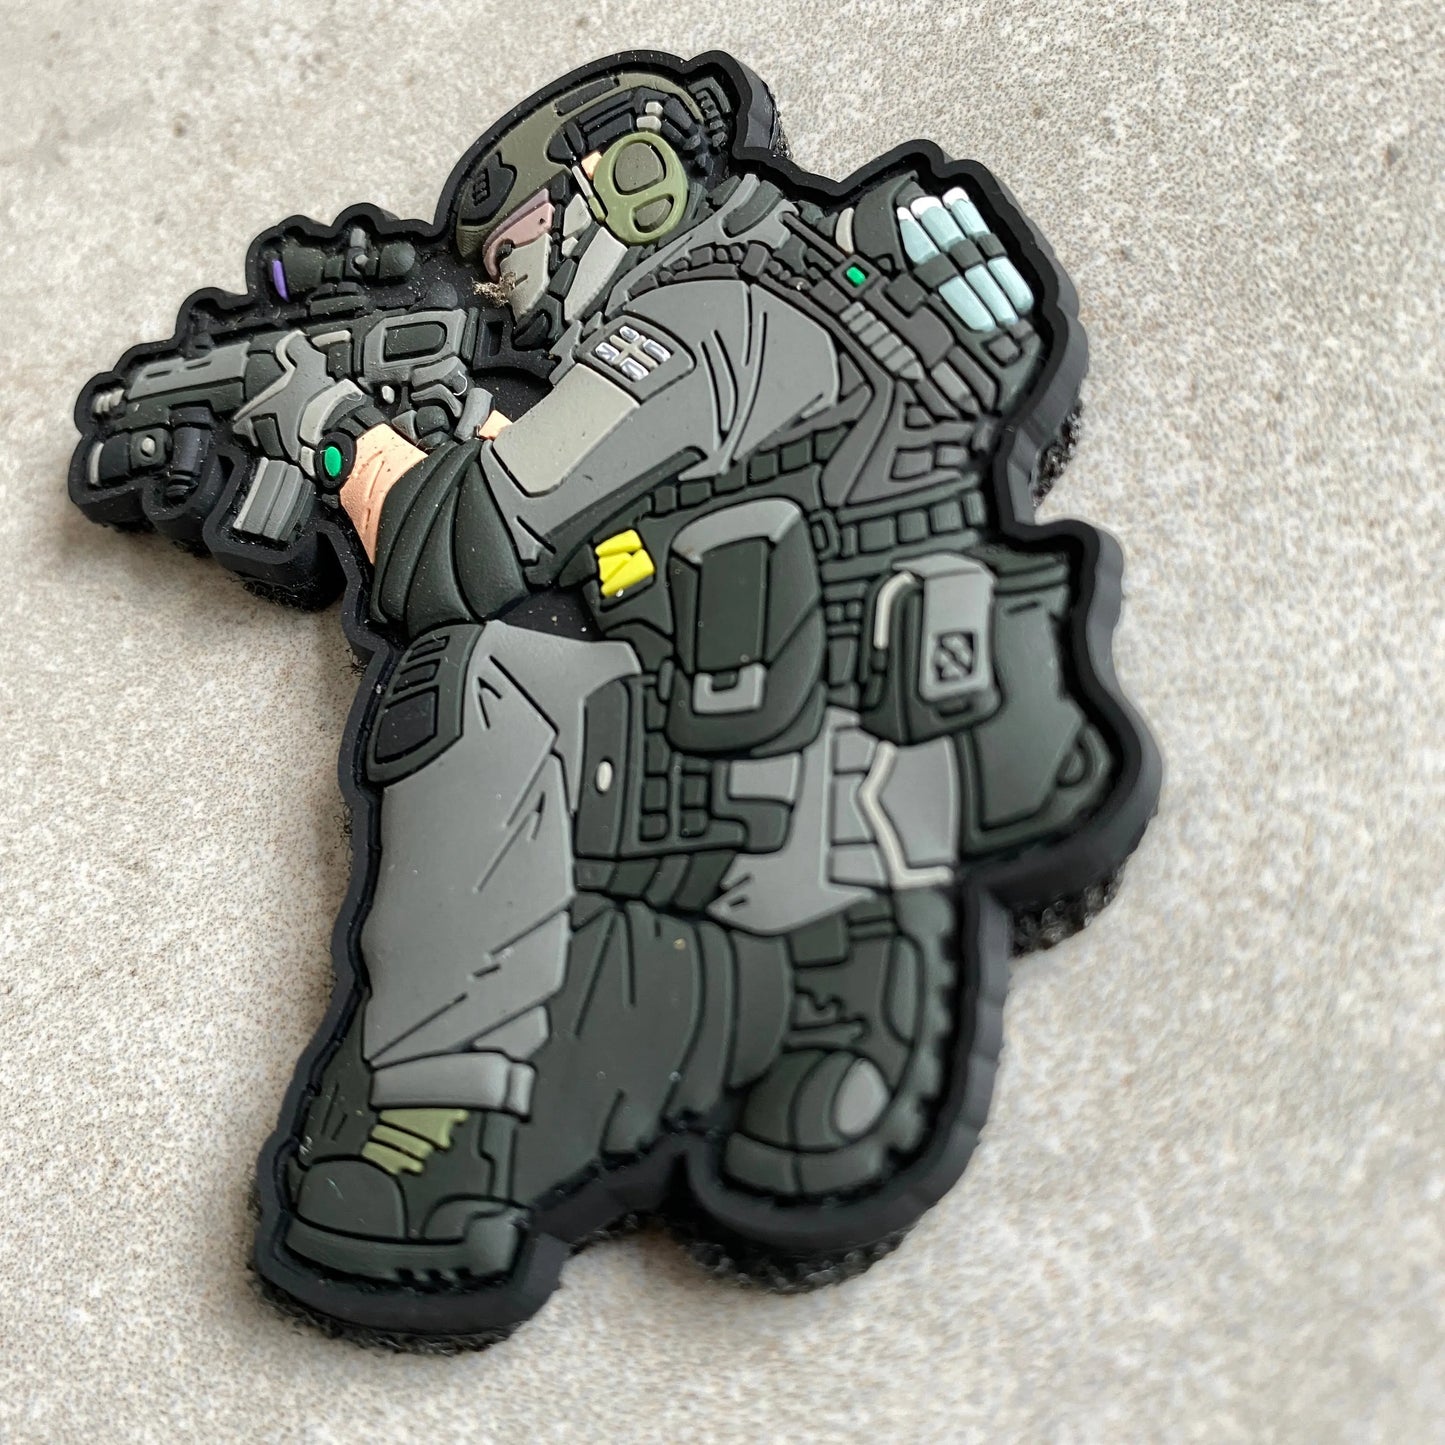 SOF - London Firearms patchlab